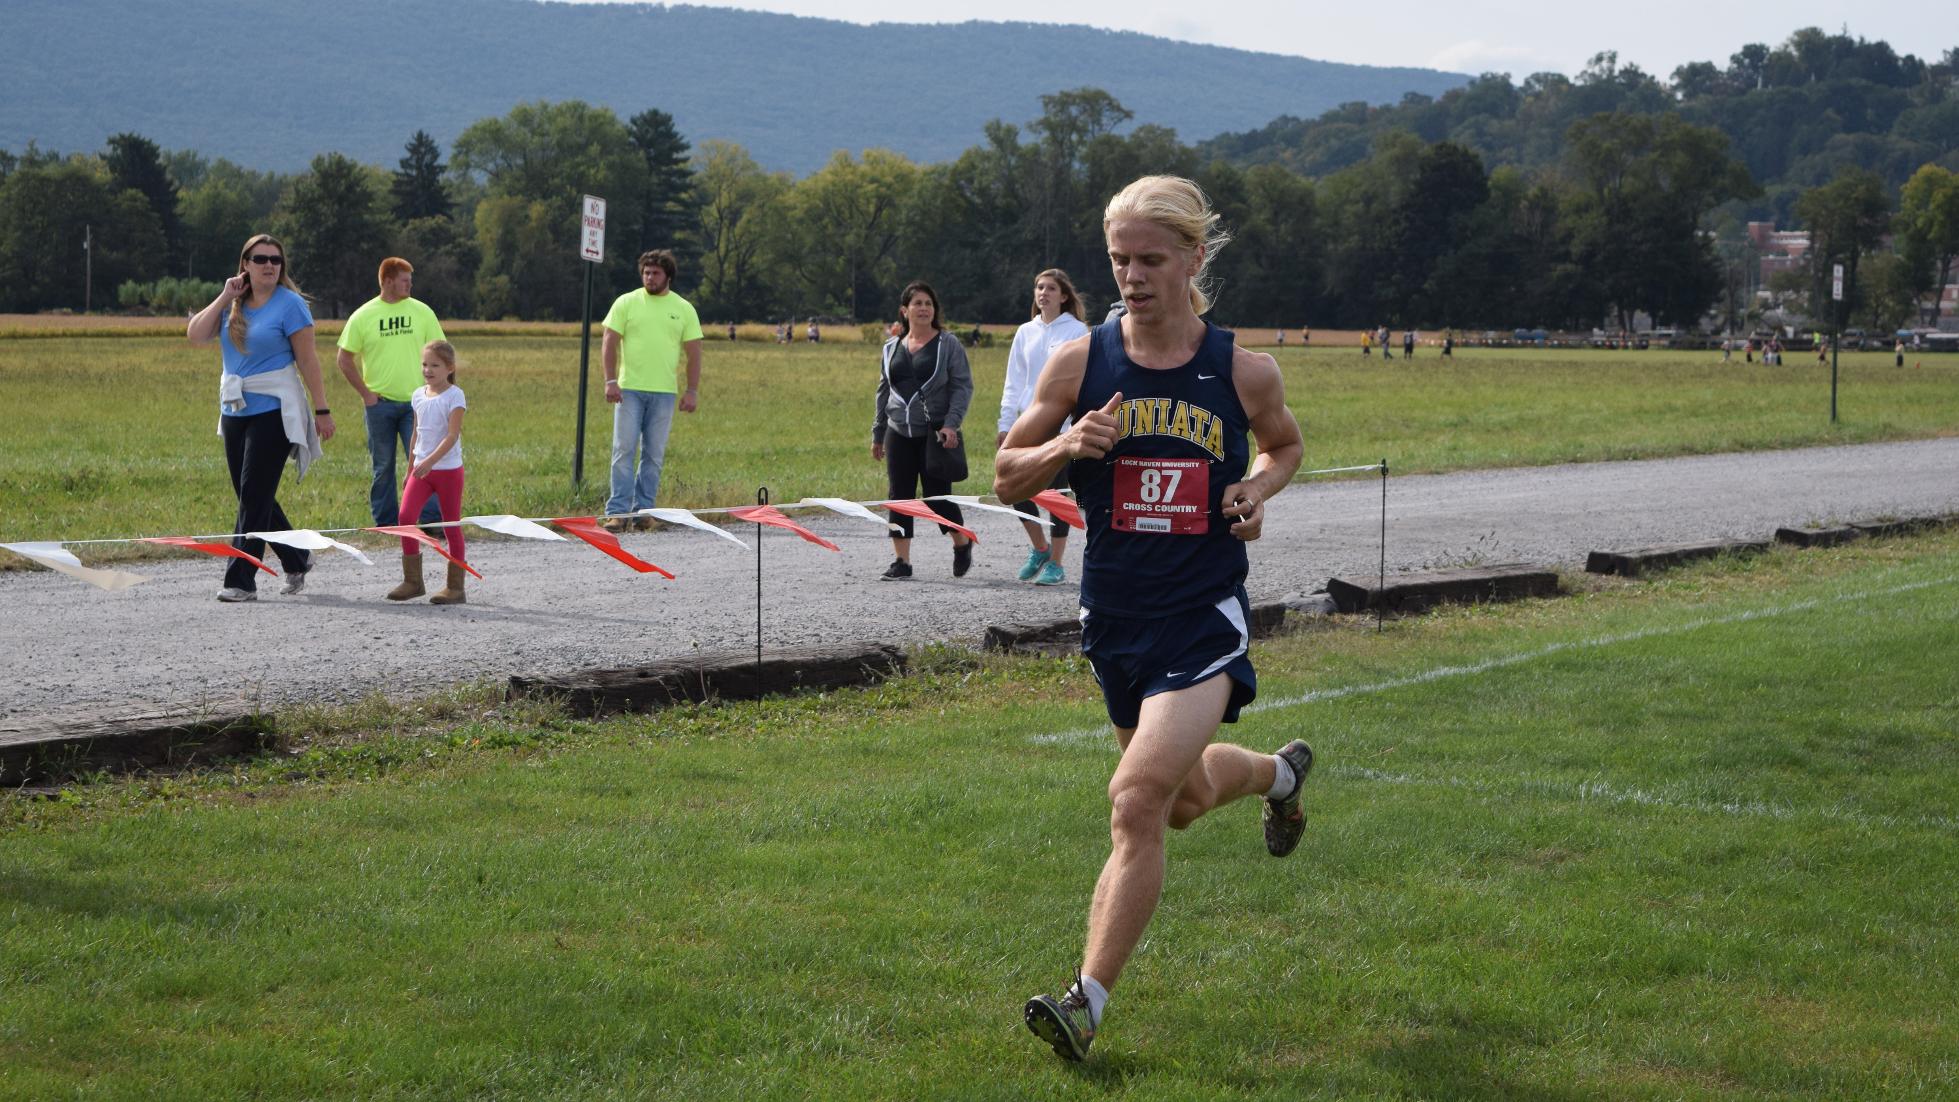 Two Eagles Place in the Top Ten at Moravian Invitational